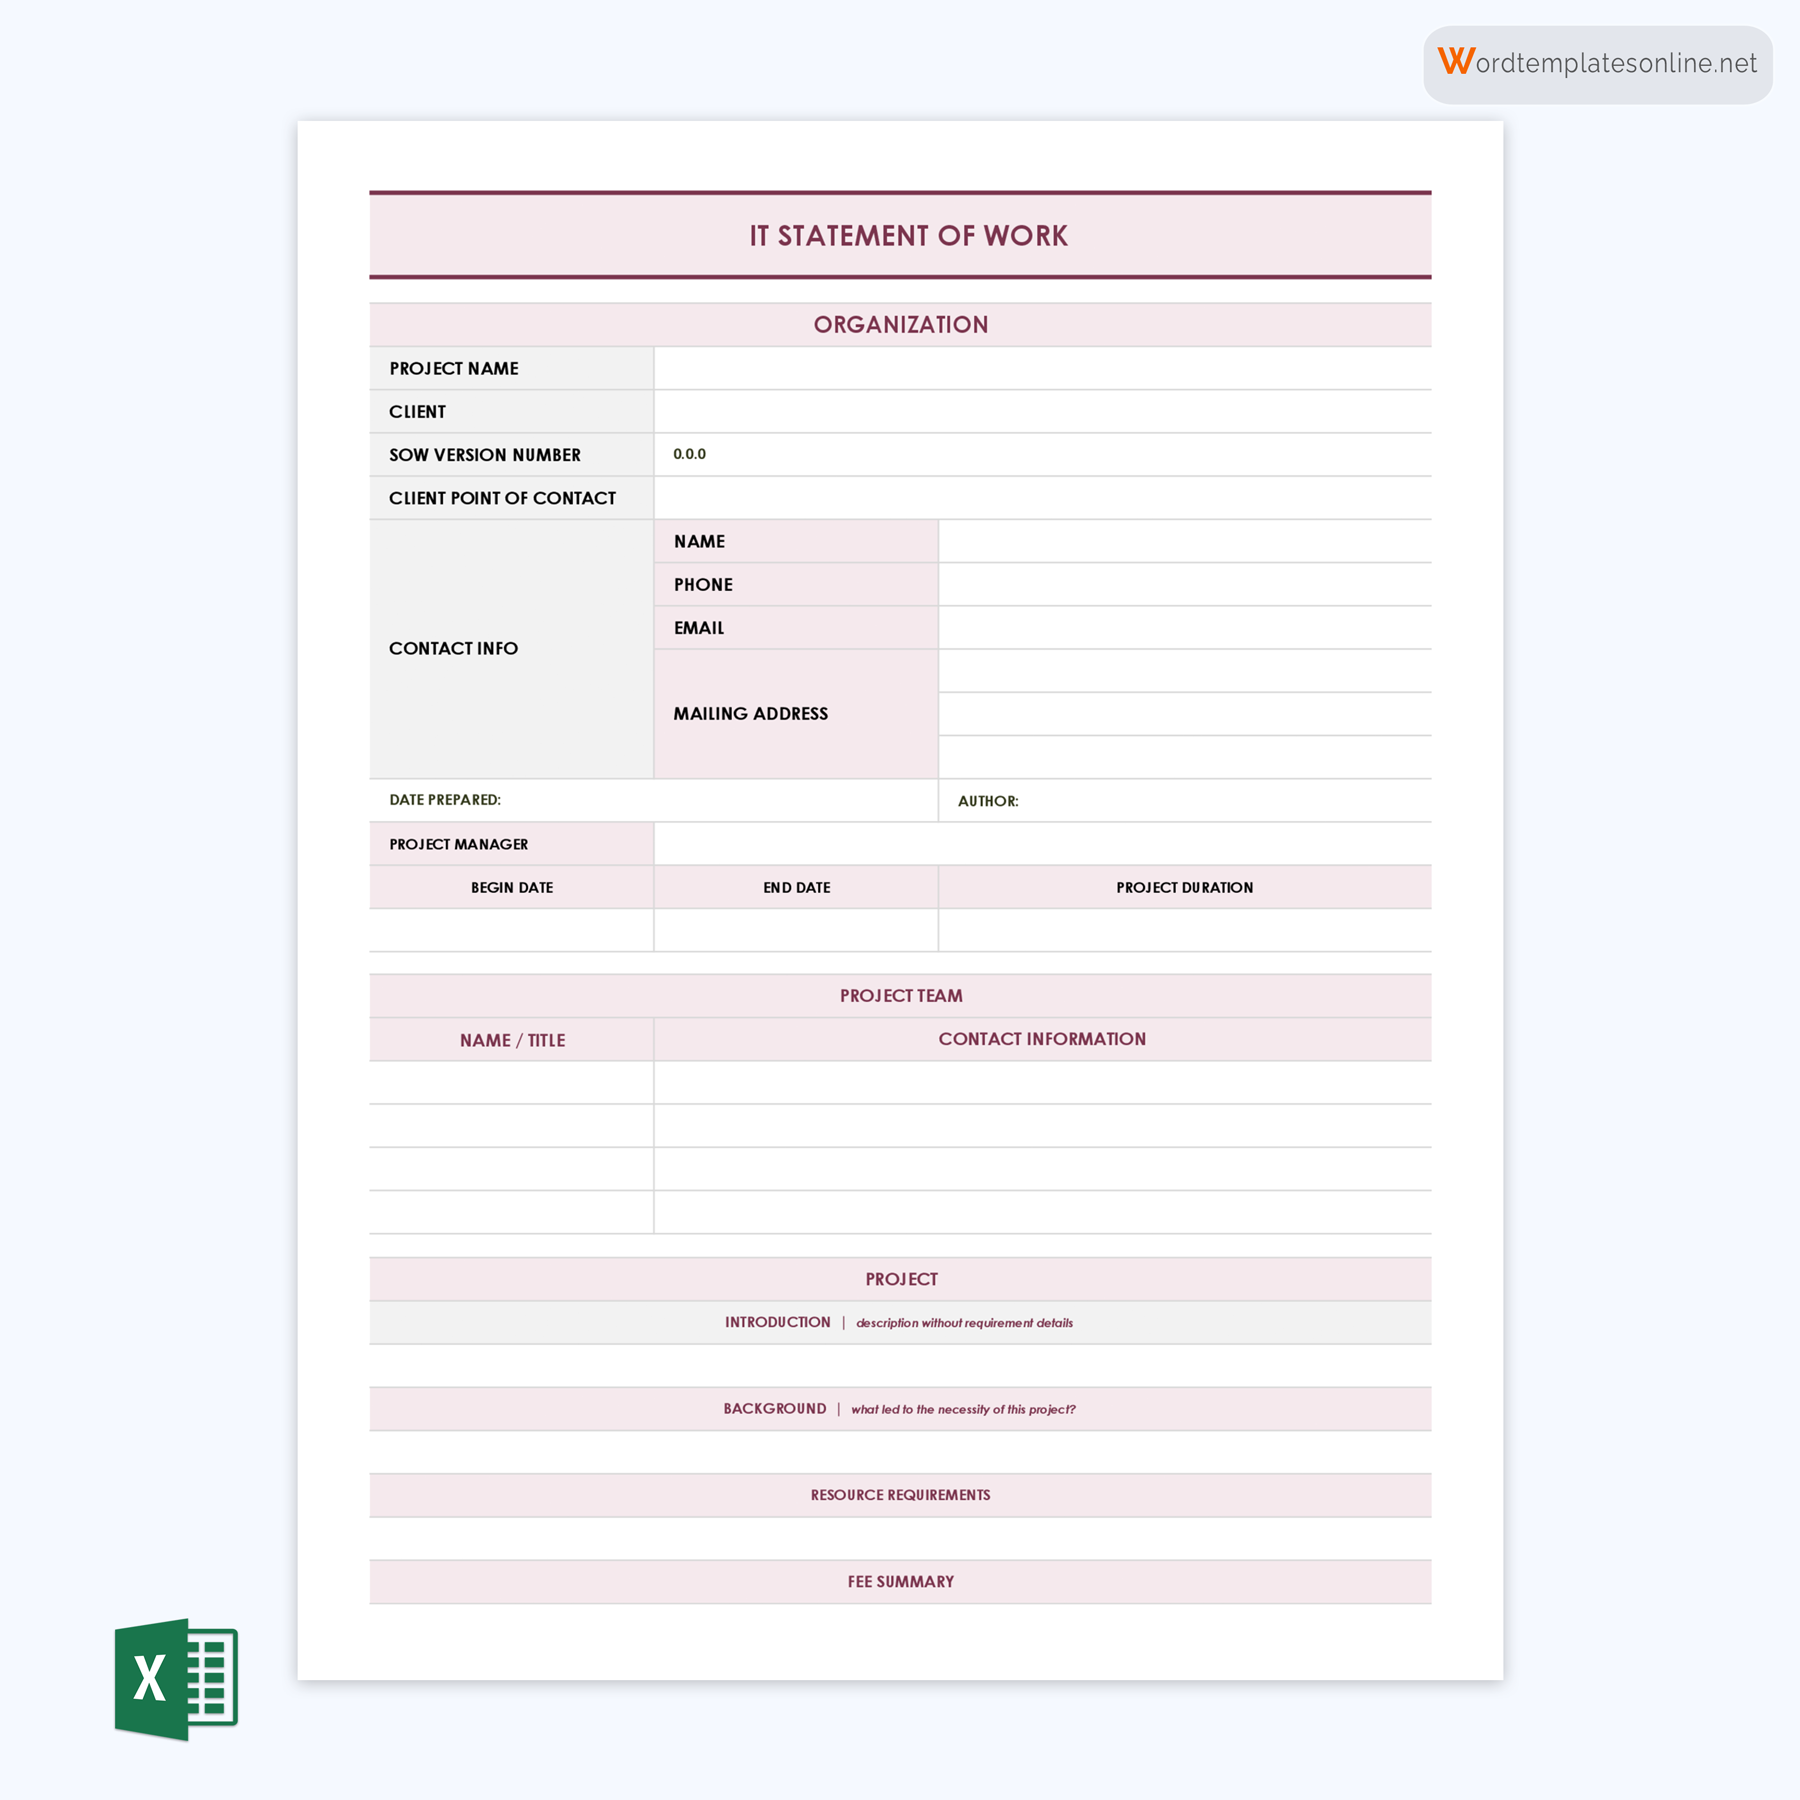 Professional Downloadable IT Statement of Work Template as Word File